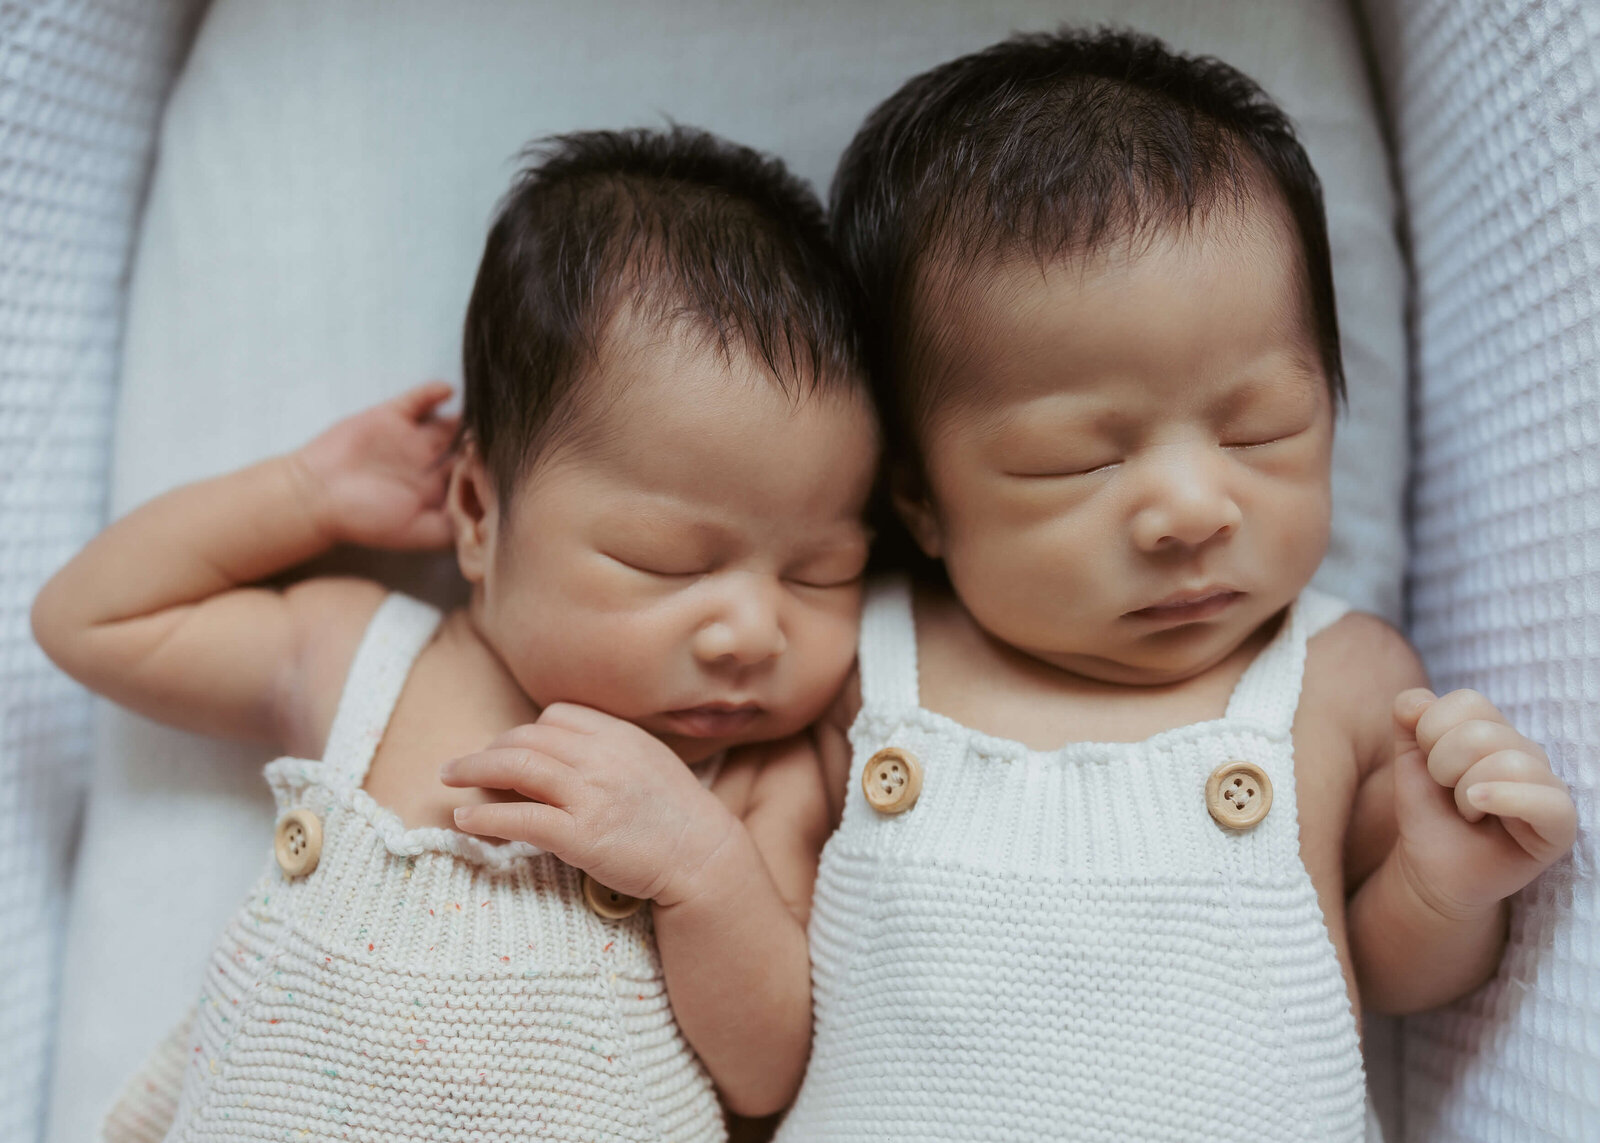 Twin babies sleeping in matching outfits in a white bassinette for their newborn photoshoot.